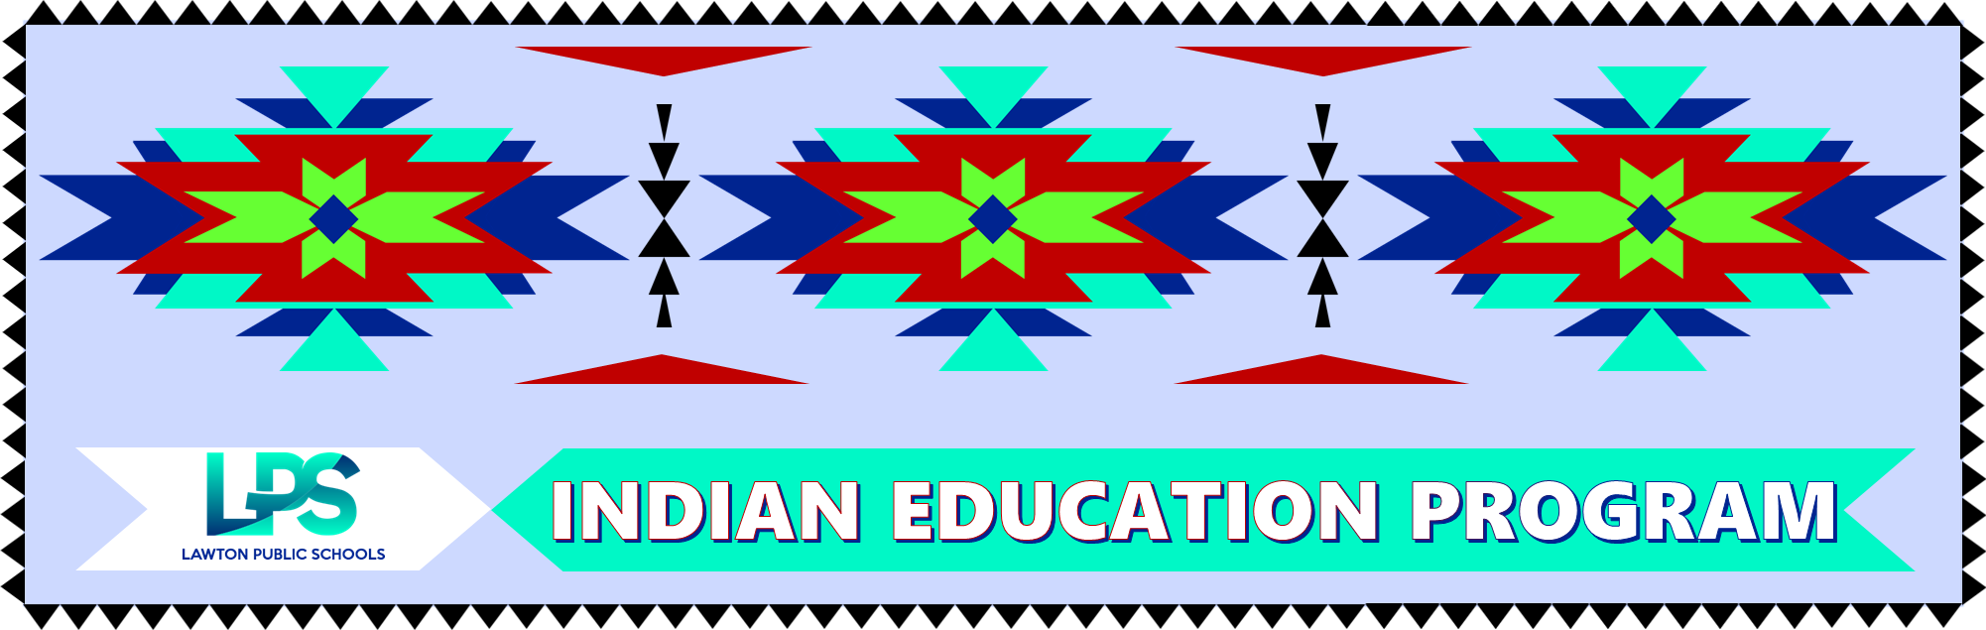 Indian Education Banner